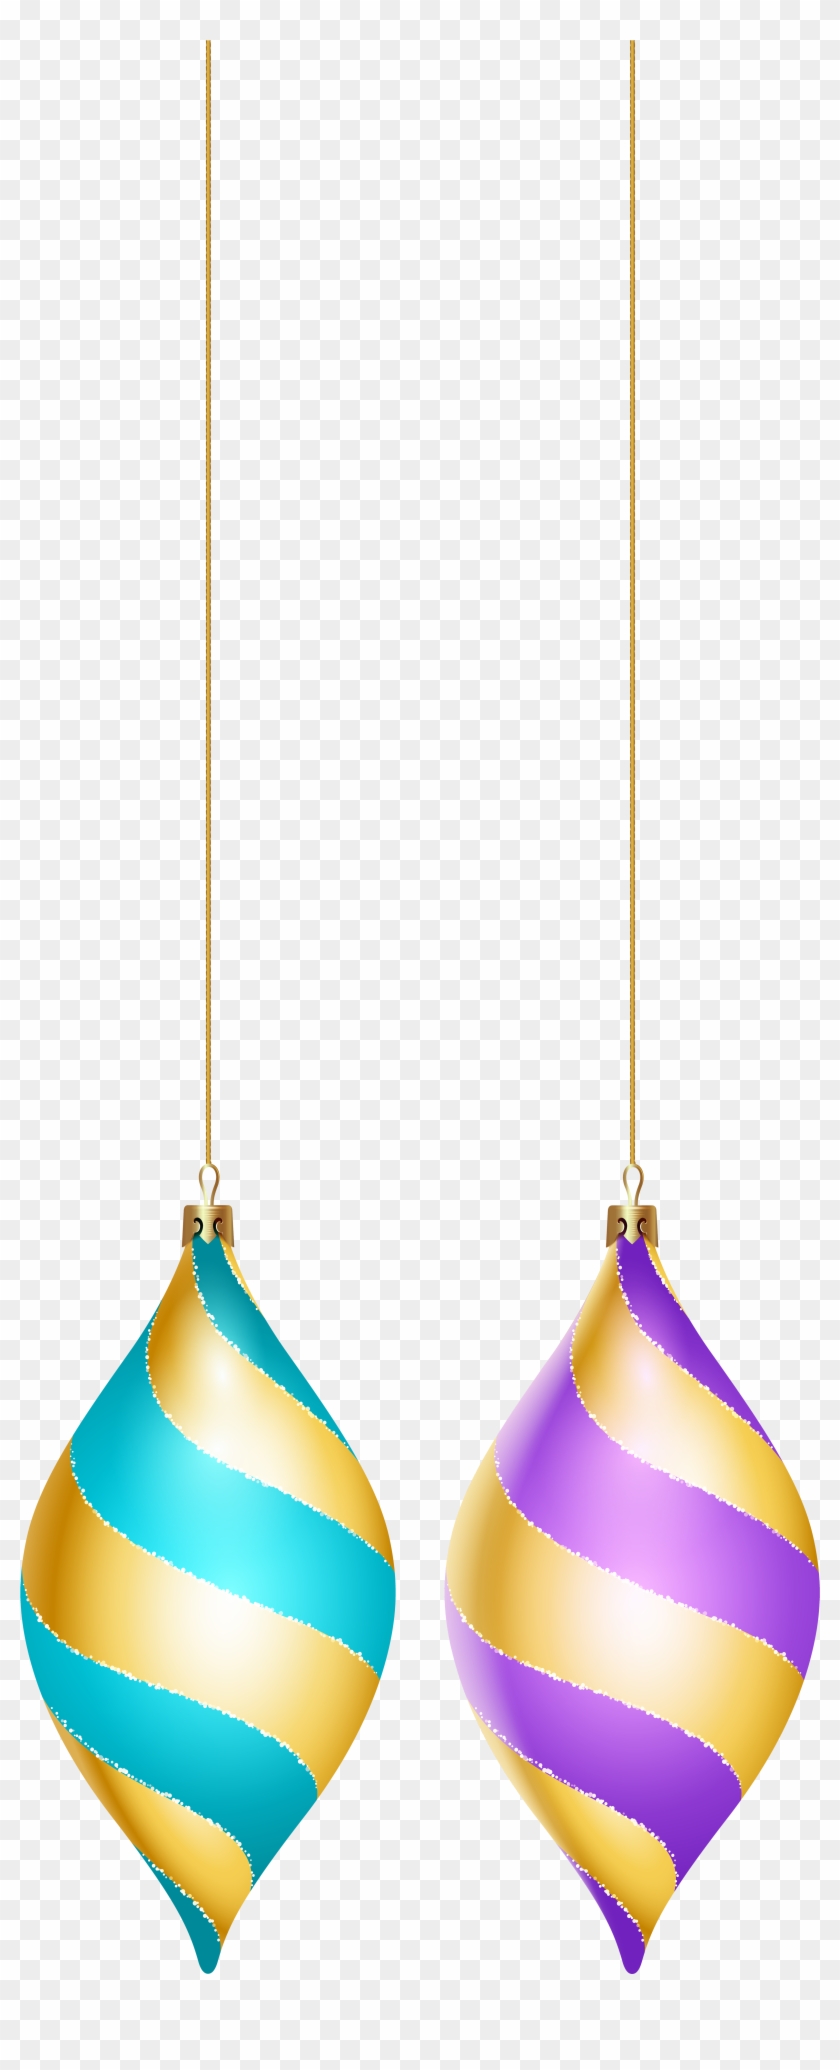 Christmas Tree Ornaments Png Clip Art Image - Earrings Transparent Png #3686281